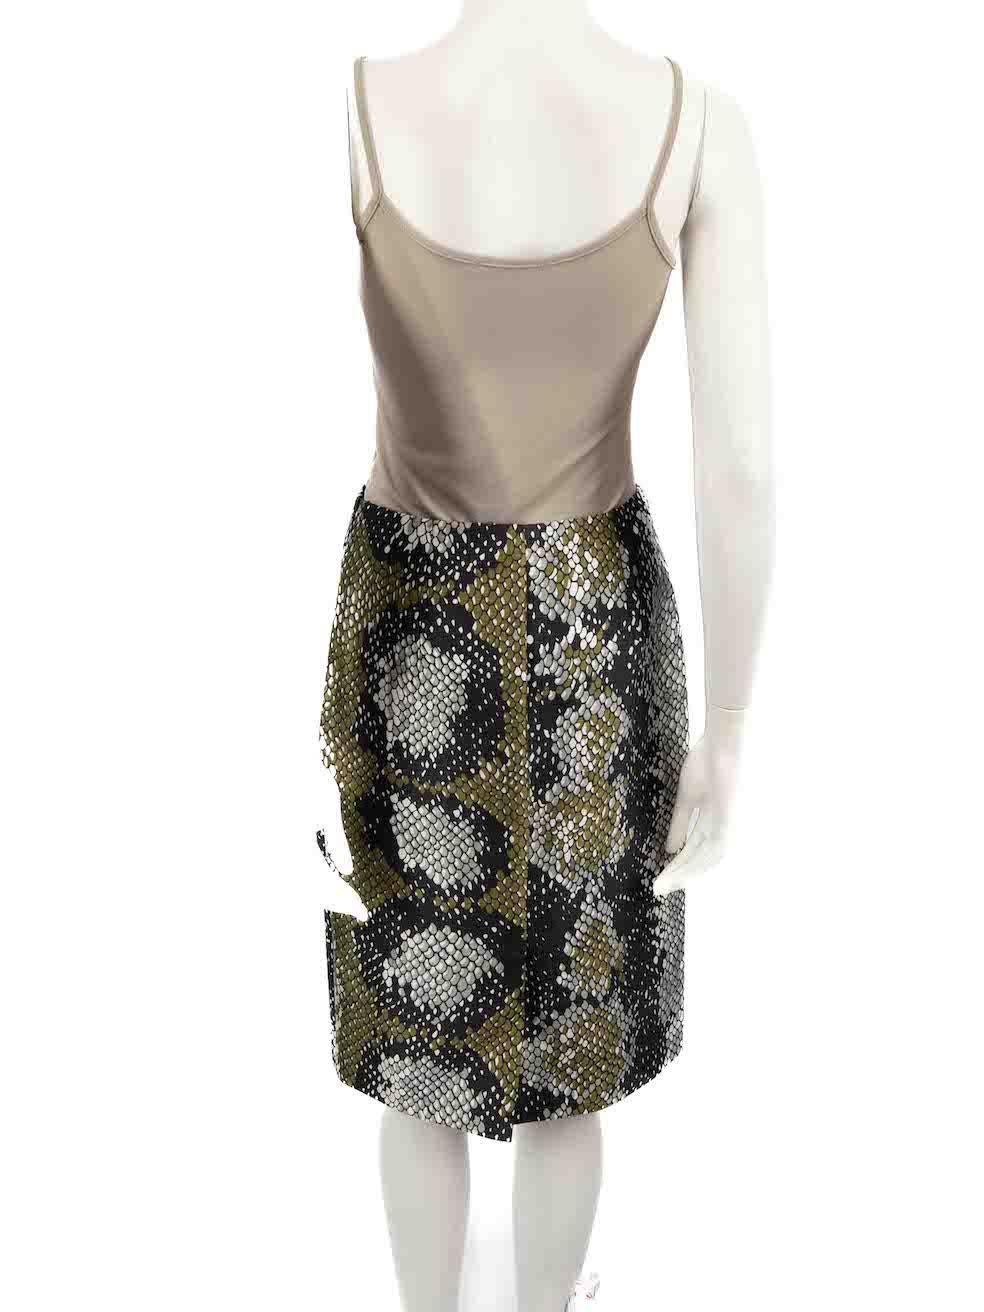 Prada Snake Print Pencil Skirt Size S In Good Condition For Sale In London, GB